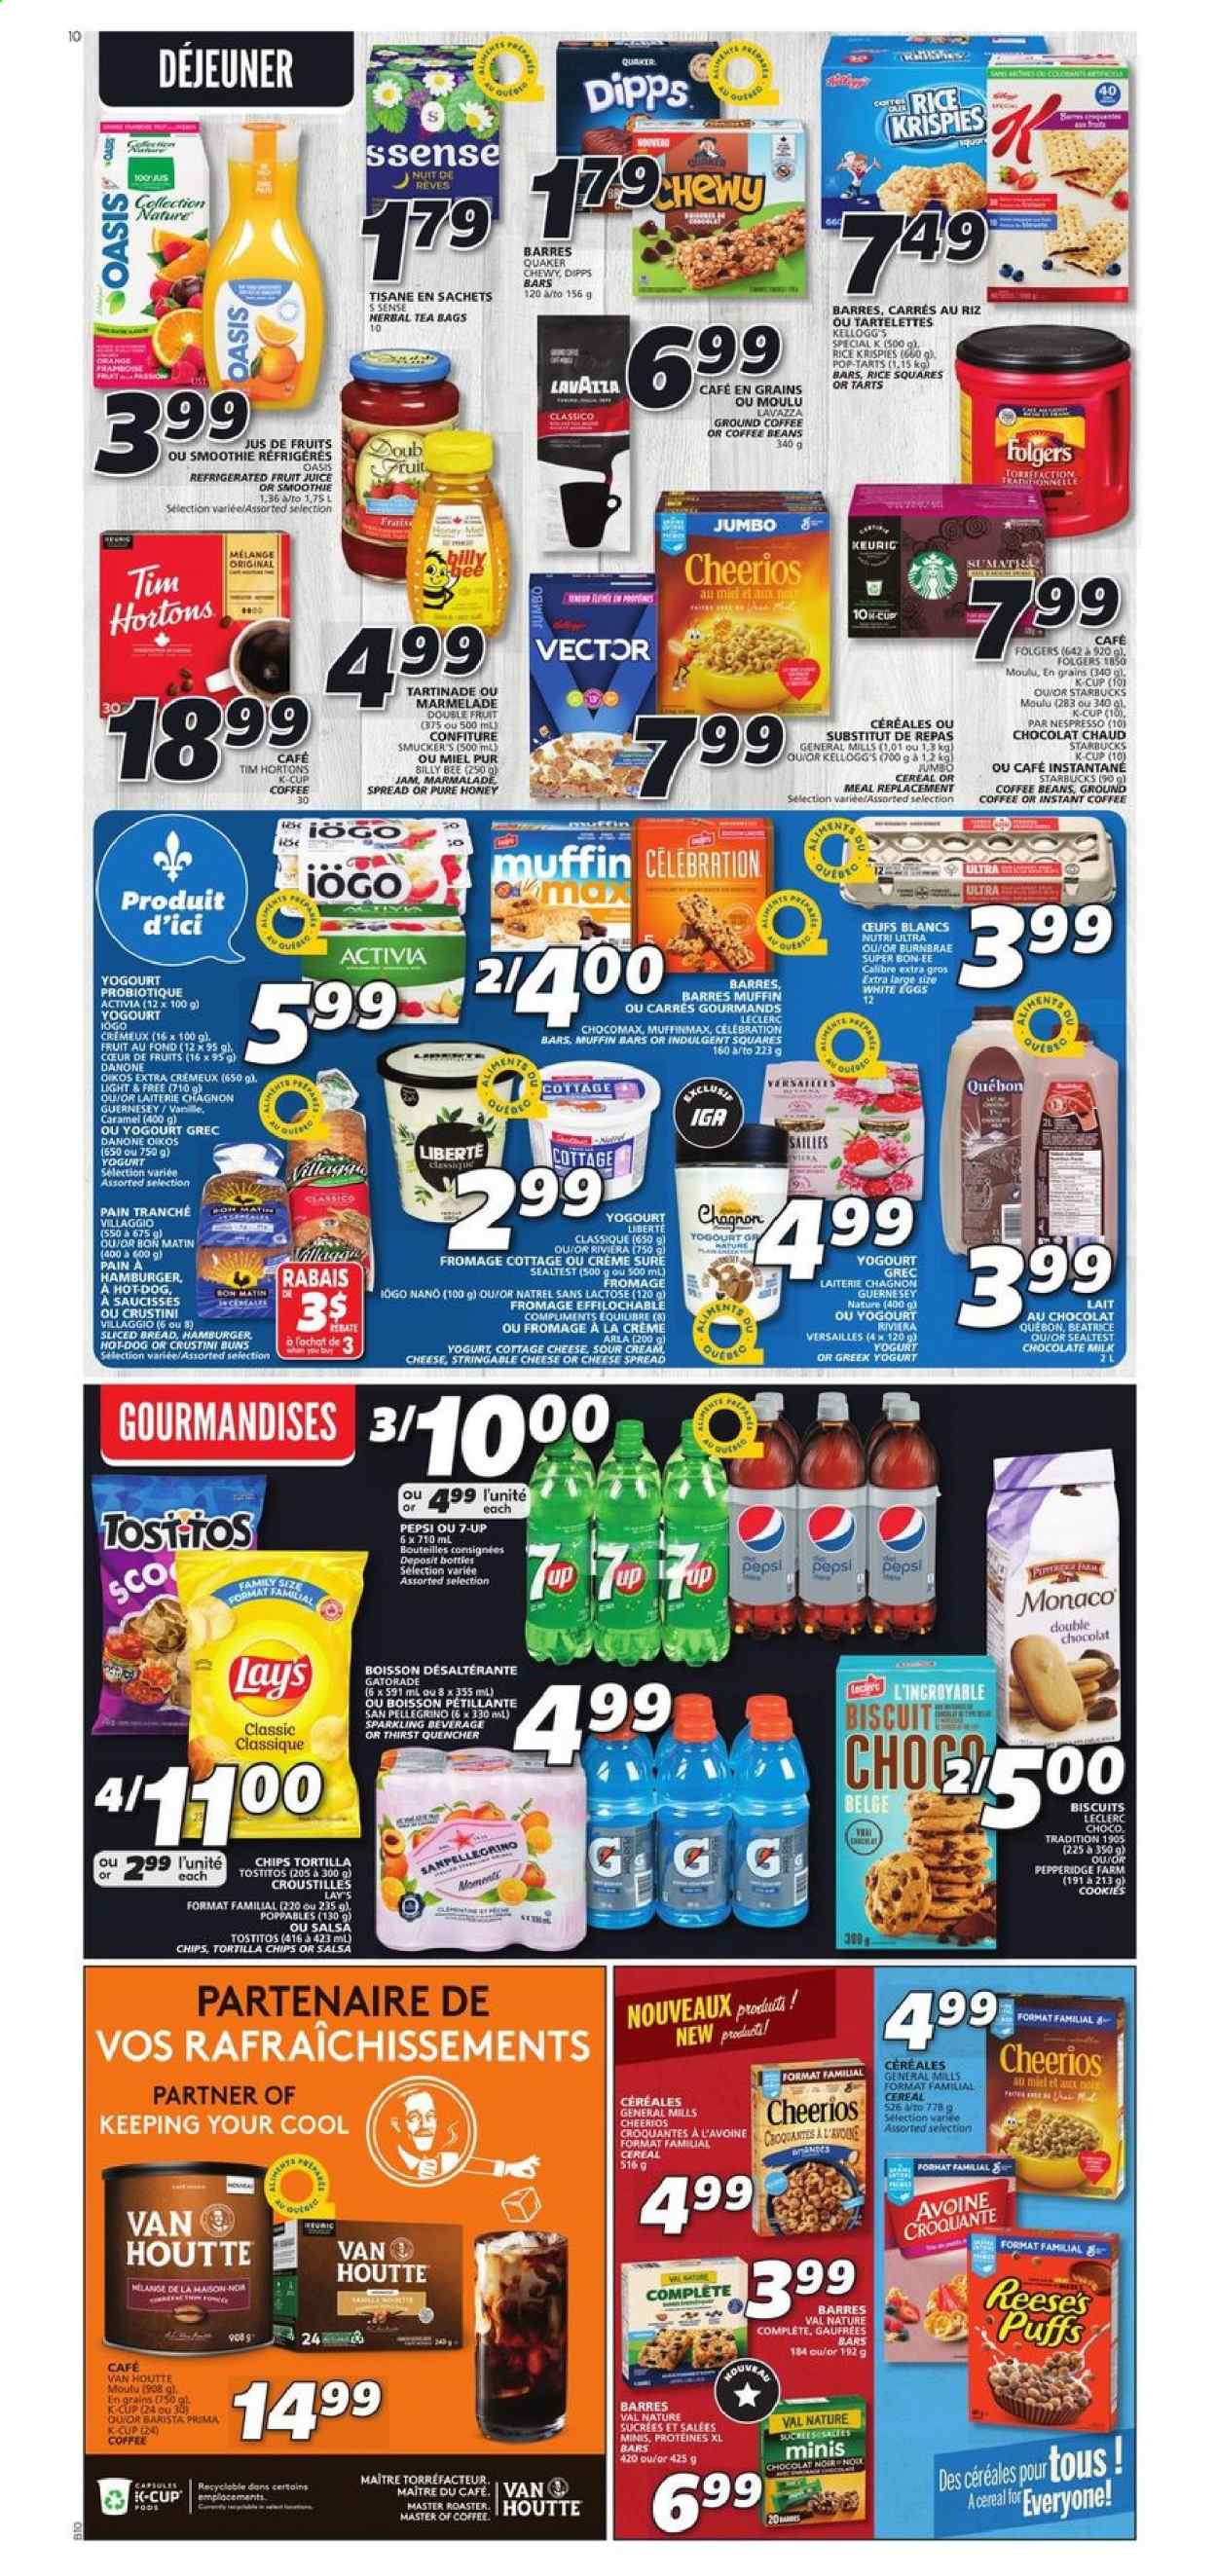 thumbnail - IGA Flyer - July 01, 2021 - July 07, 2021 - Sales products - buns, puffs, muffin, hamburger, Quaker, cheese spread, cottage cheese, Arla, greek yoghurt, yoghurt, Activia, Oikos, milk, eggs, sour cream, Reese's, cookies, milk chocolate, chocolate, Celebration, Kellogg's, biscuit, Pop-Tarts, tortilla chips, Lay’s, Tostitos, cereals, Cheerios, Rice Krispies, caramel, salsa, Classico, honey, fruit jam, Pepsi, juice, fruit juice, 7UP, Gatorade, smoothie, San Pellegrino, herbal tea, tea bags, coffee beans, Folgers, ground coffee, coffee capsules, Starbucks, K-Cups, Lavazza, Danone, chips. Page 8.